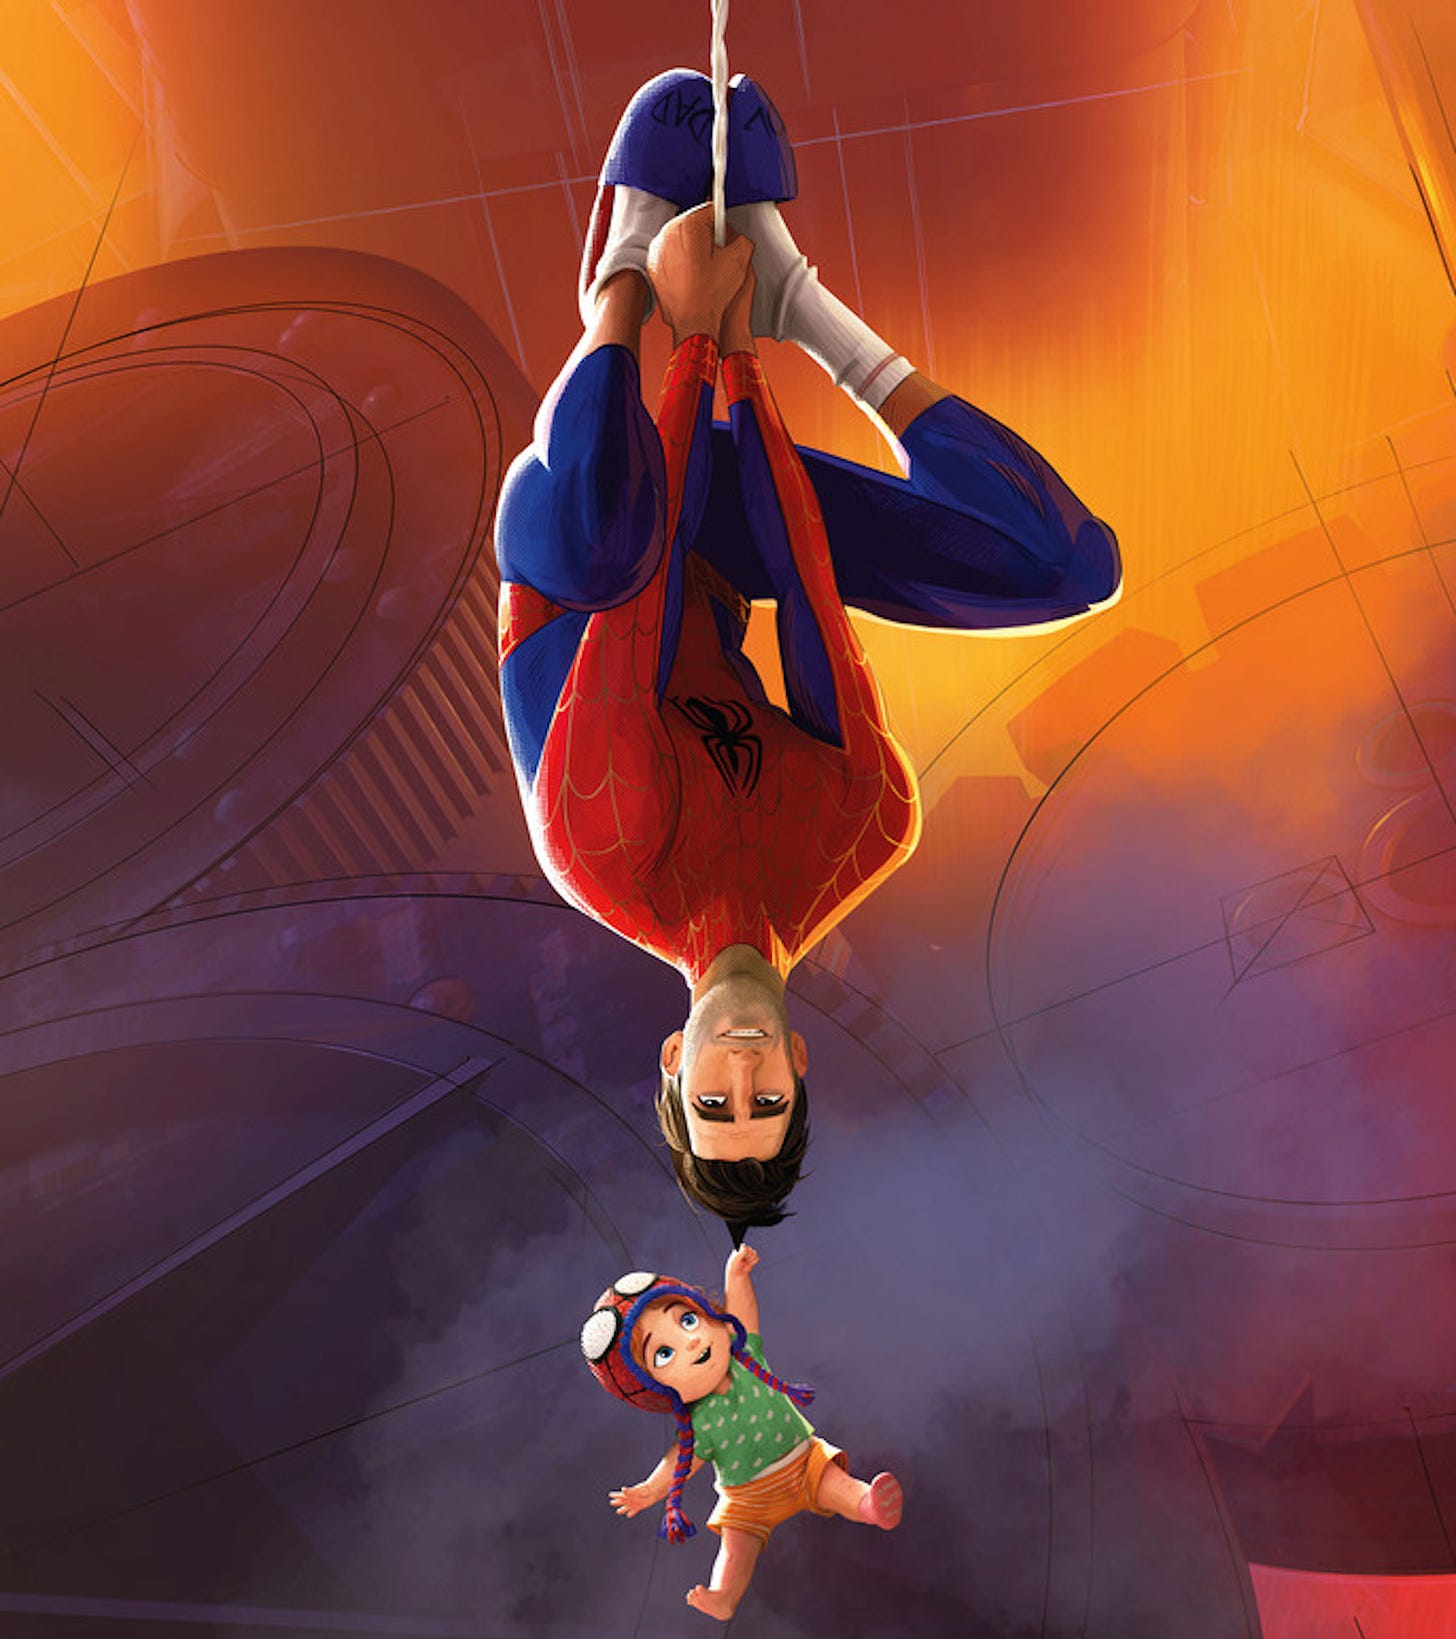 Peter B. Parker is hanging upside down on his web, wearing his costume, blue slippers, and no mask. Holding onto his hair is his daughter Mayday, donning a hand-crafted Spidey hat. This is in a character poster for SPIDER-MAN: ACROSS THE SPIDER-VERSE.